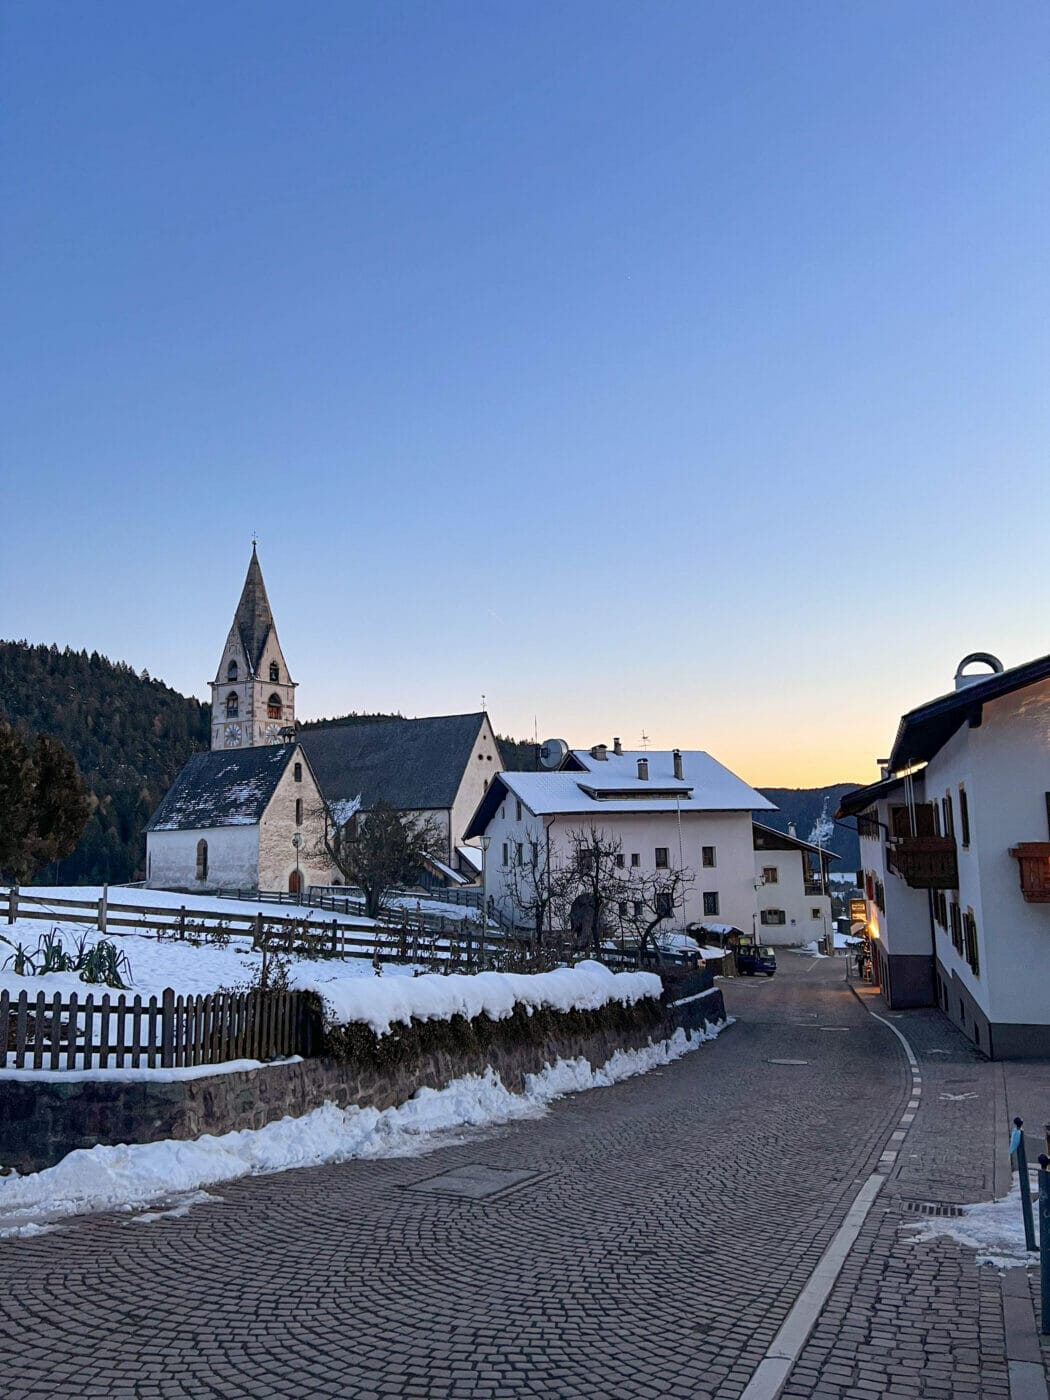 the charming little quaint town of Meltina in the Dolomites during the winter after it had just snowed